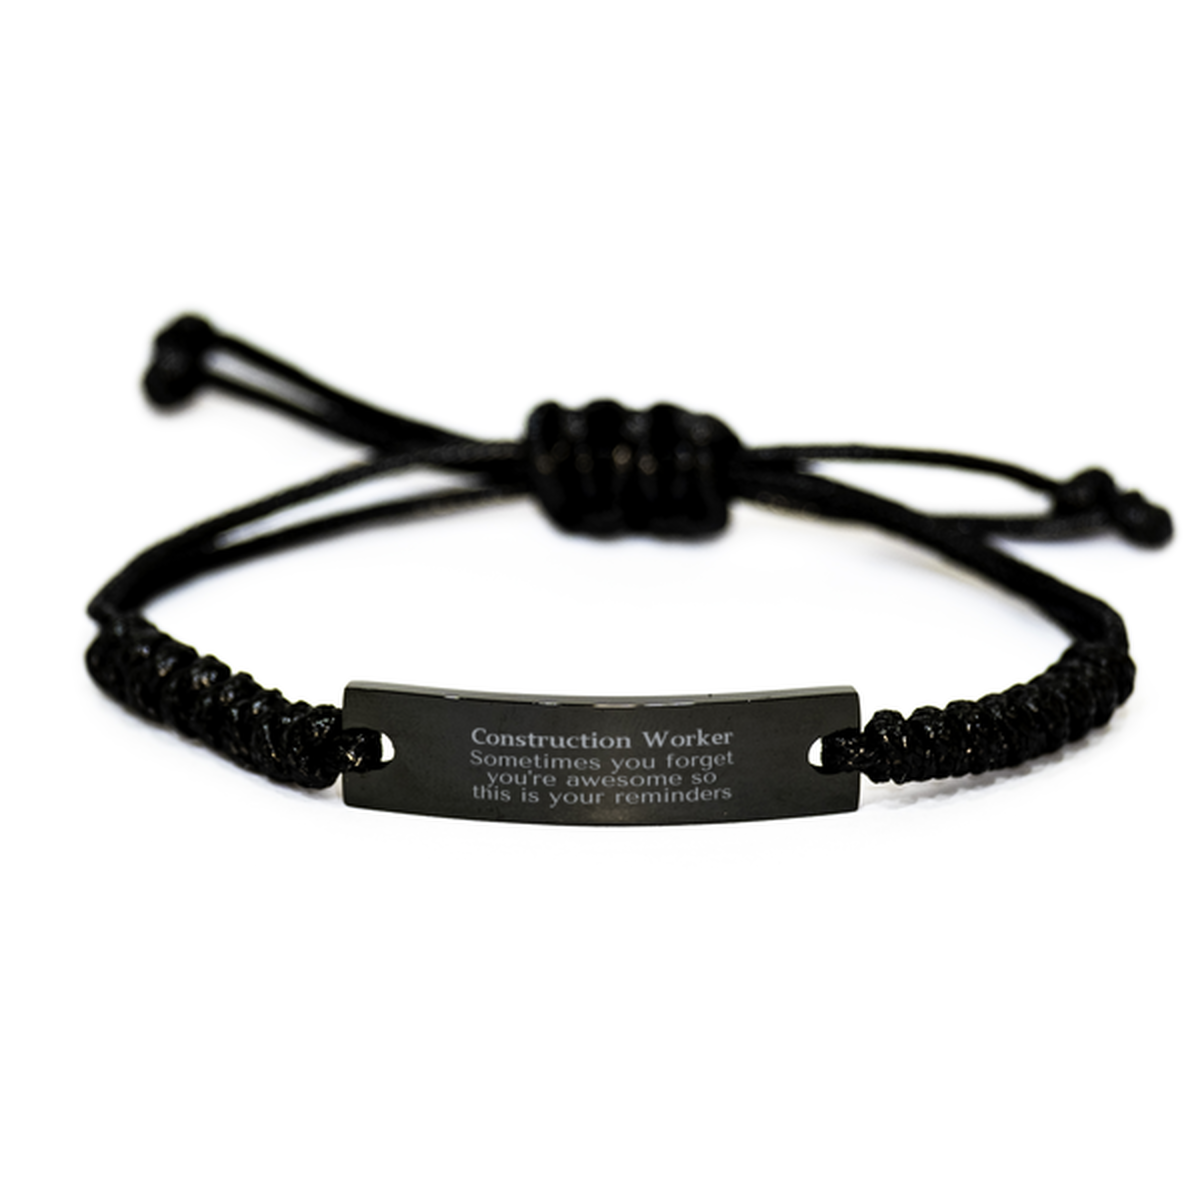 Sentimental Construction Worker Black Rope Bracelet, Construction Worker Sometimes you forget you're awesome so this is your reminders, Graduation Christmas Birthday Gifts for Construction Worker, Men, Women, Coworkers